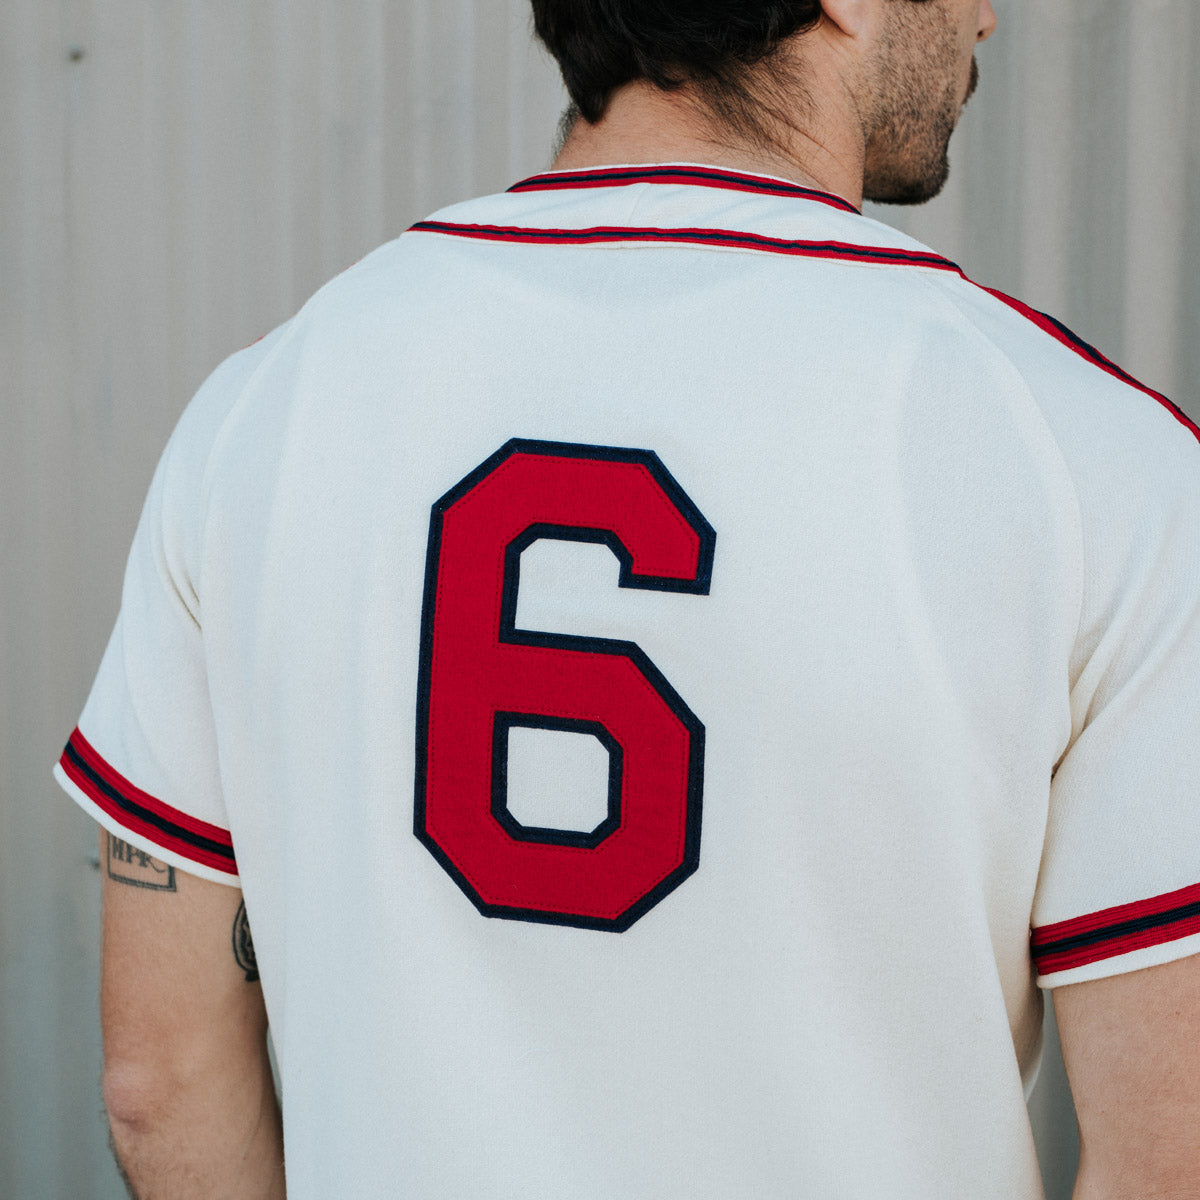 Memphis Red Sox 1945 Home Jersey